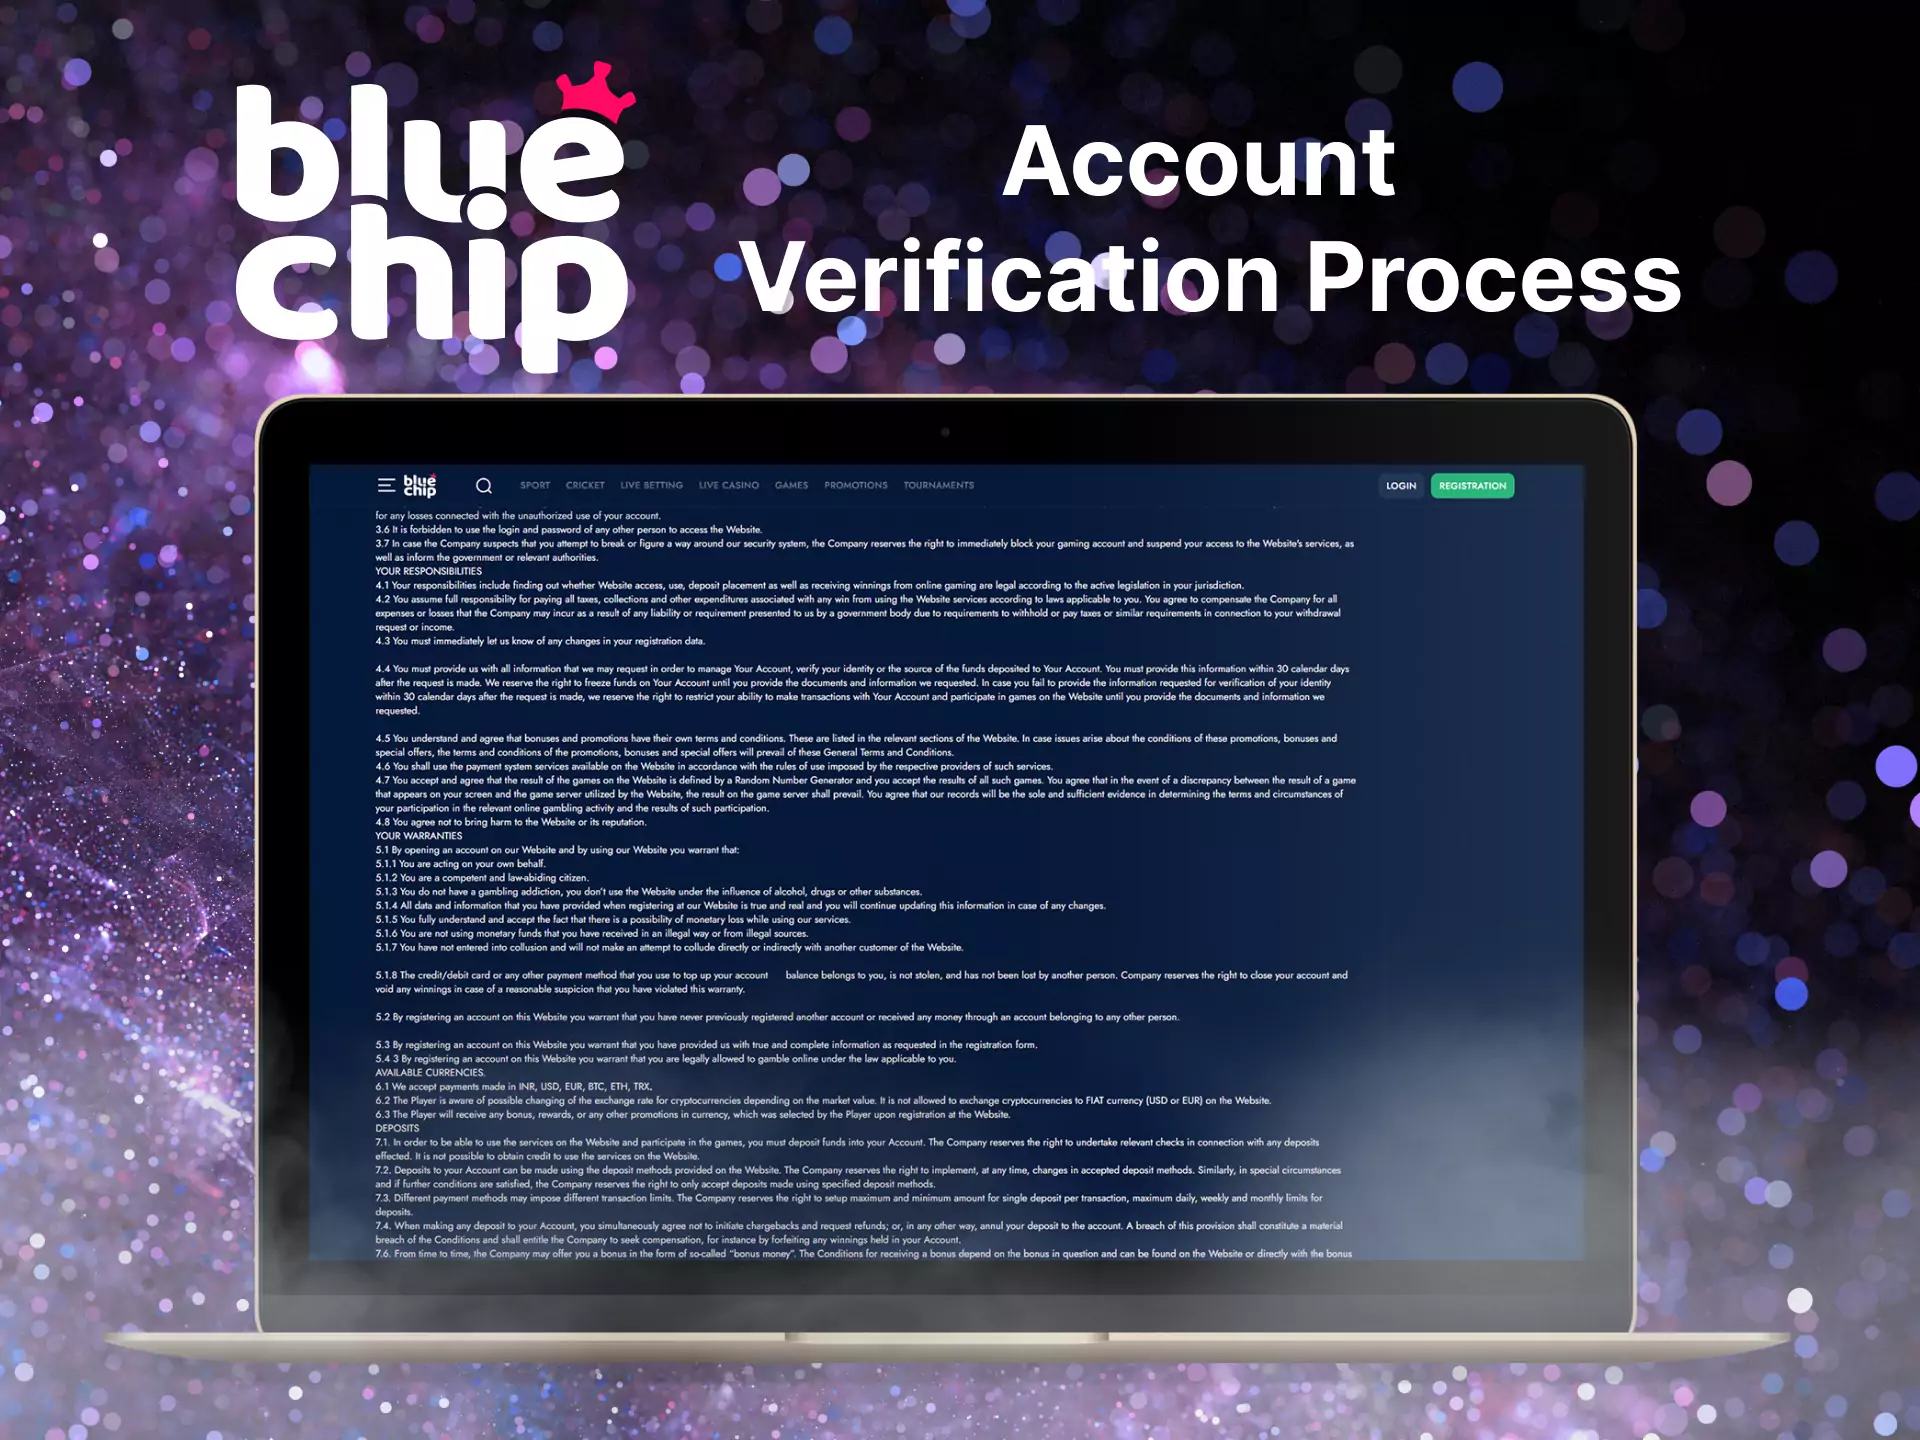 To complete the confirmation of your identity in Bluechip, use the instructions.